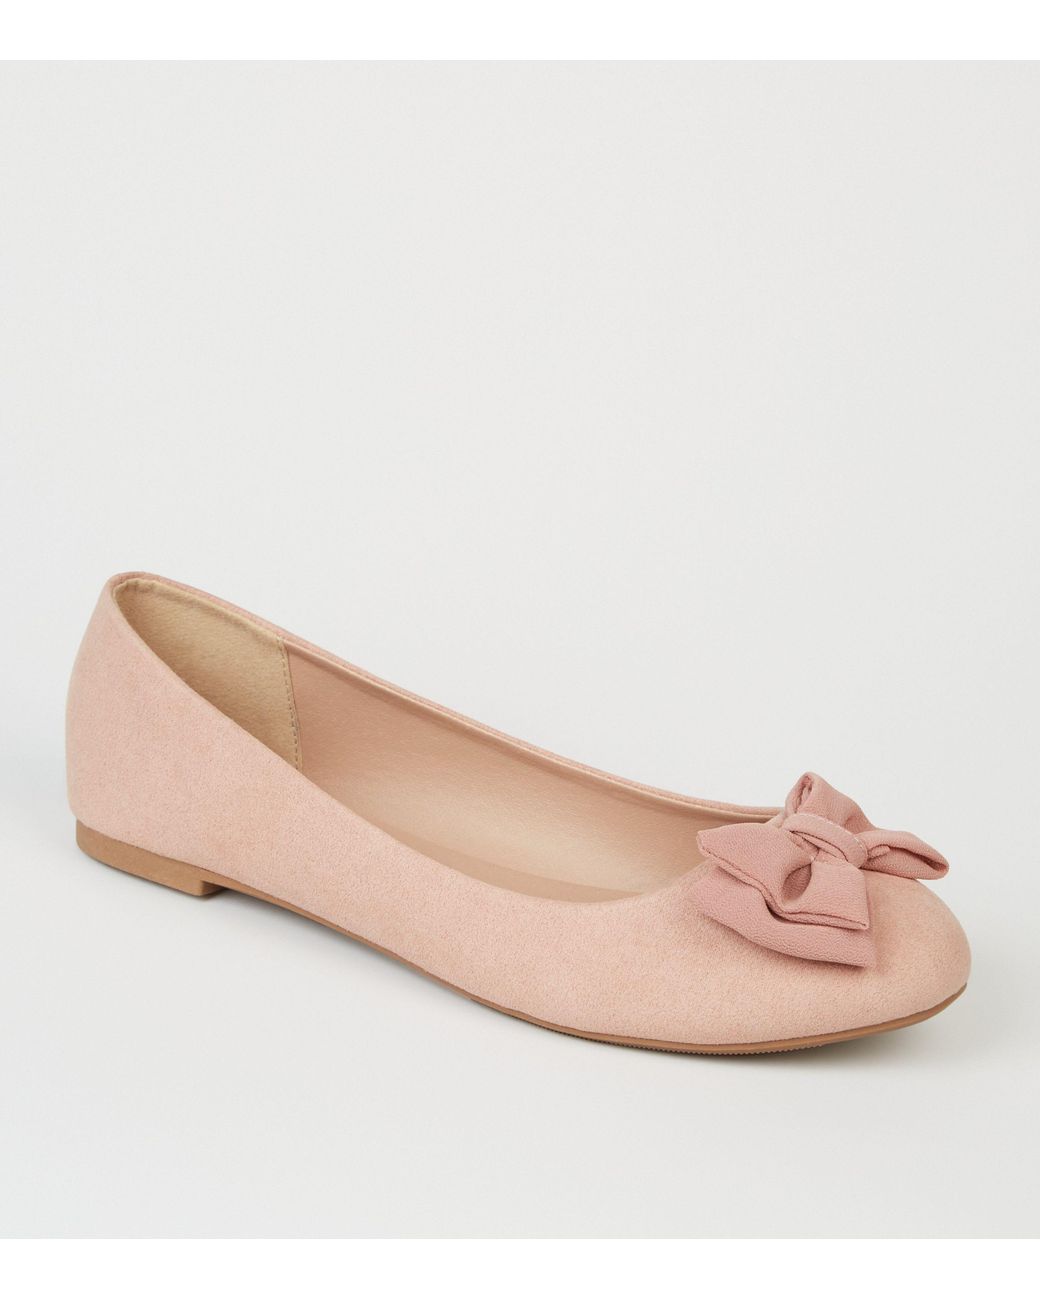 New Look Chiffon Wide Fit Pink Suedette Bow Ballet Pumps - Lyst